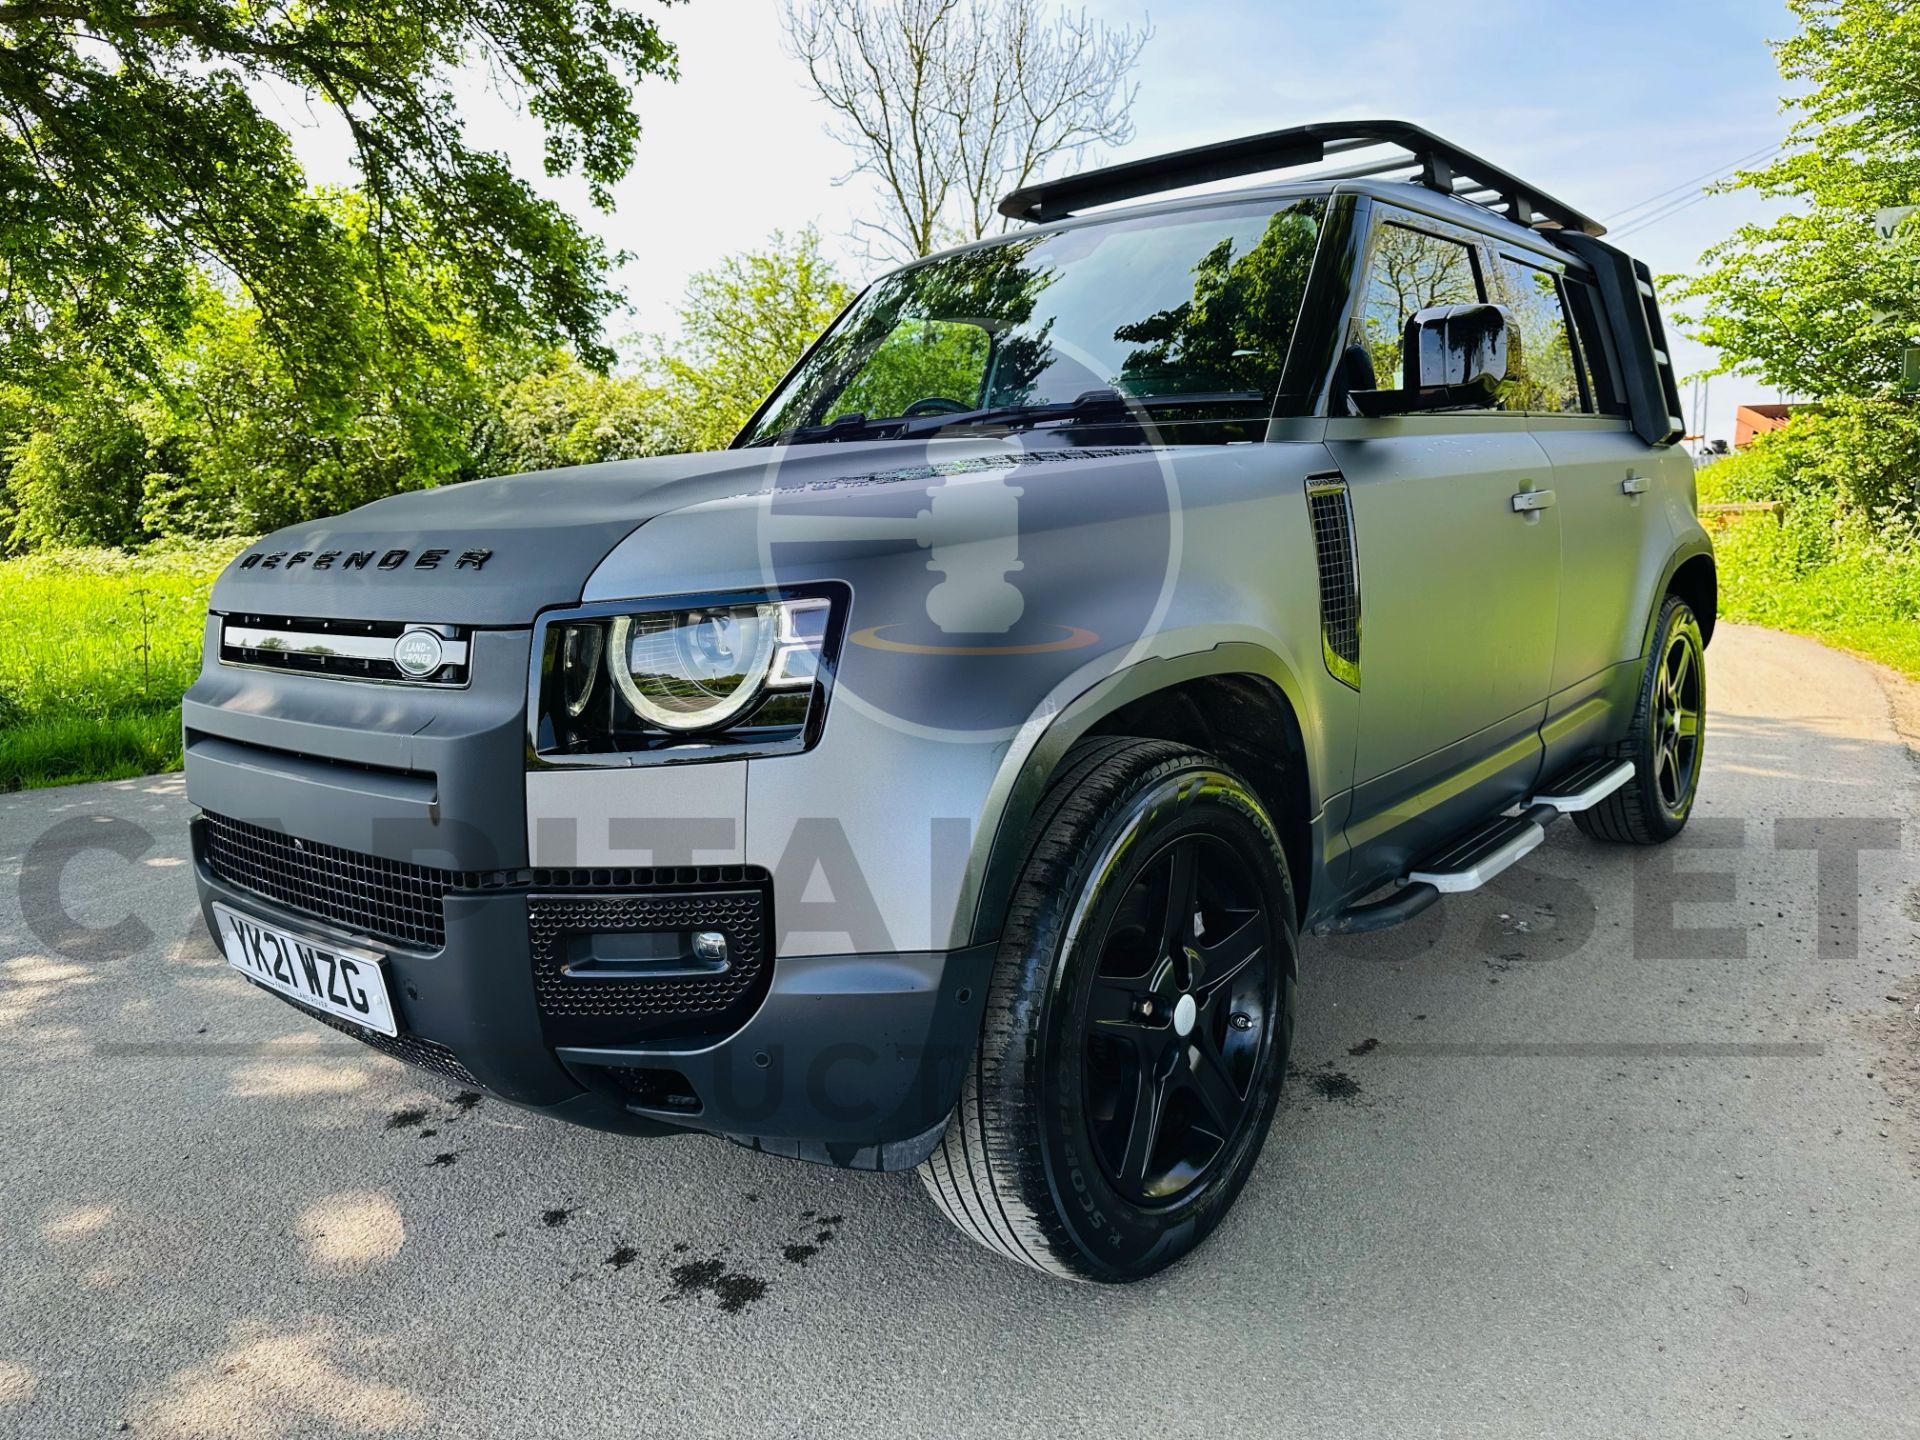 (On Sale) LAND ROVER DEFENDER 110 *SE EDITION* 7 SEATER SUV (2021) D300 - 8 SPEED AUTO *HUGE SPEC* - Image 6 of 63